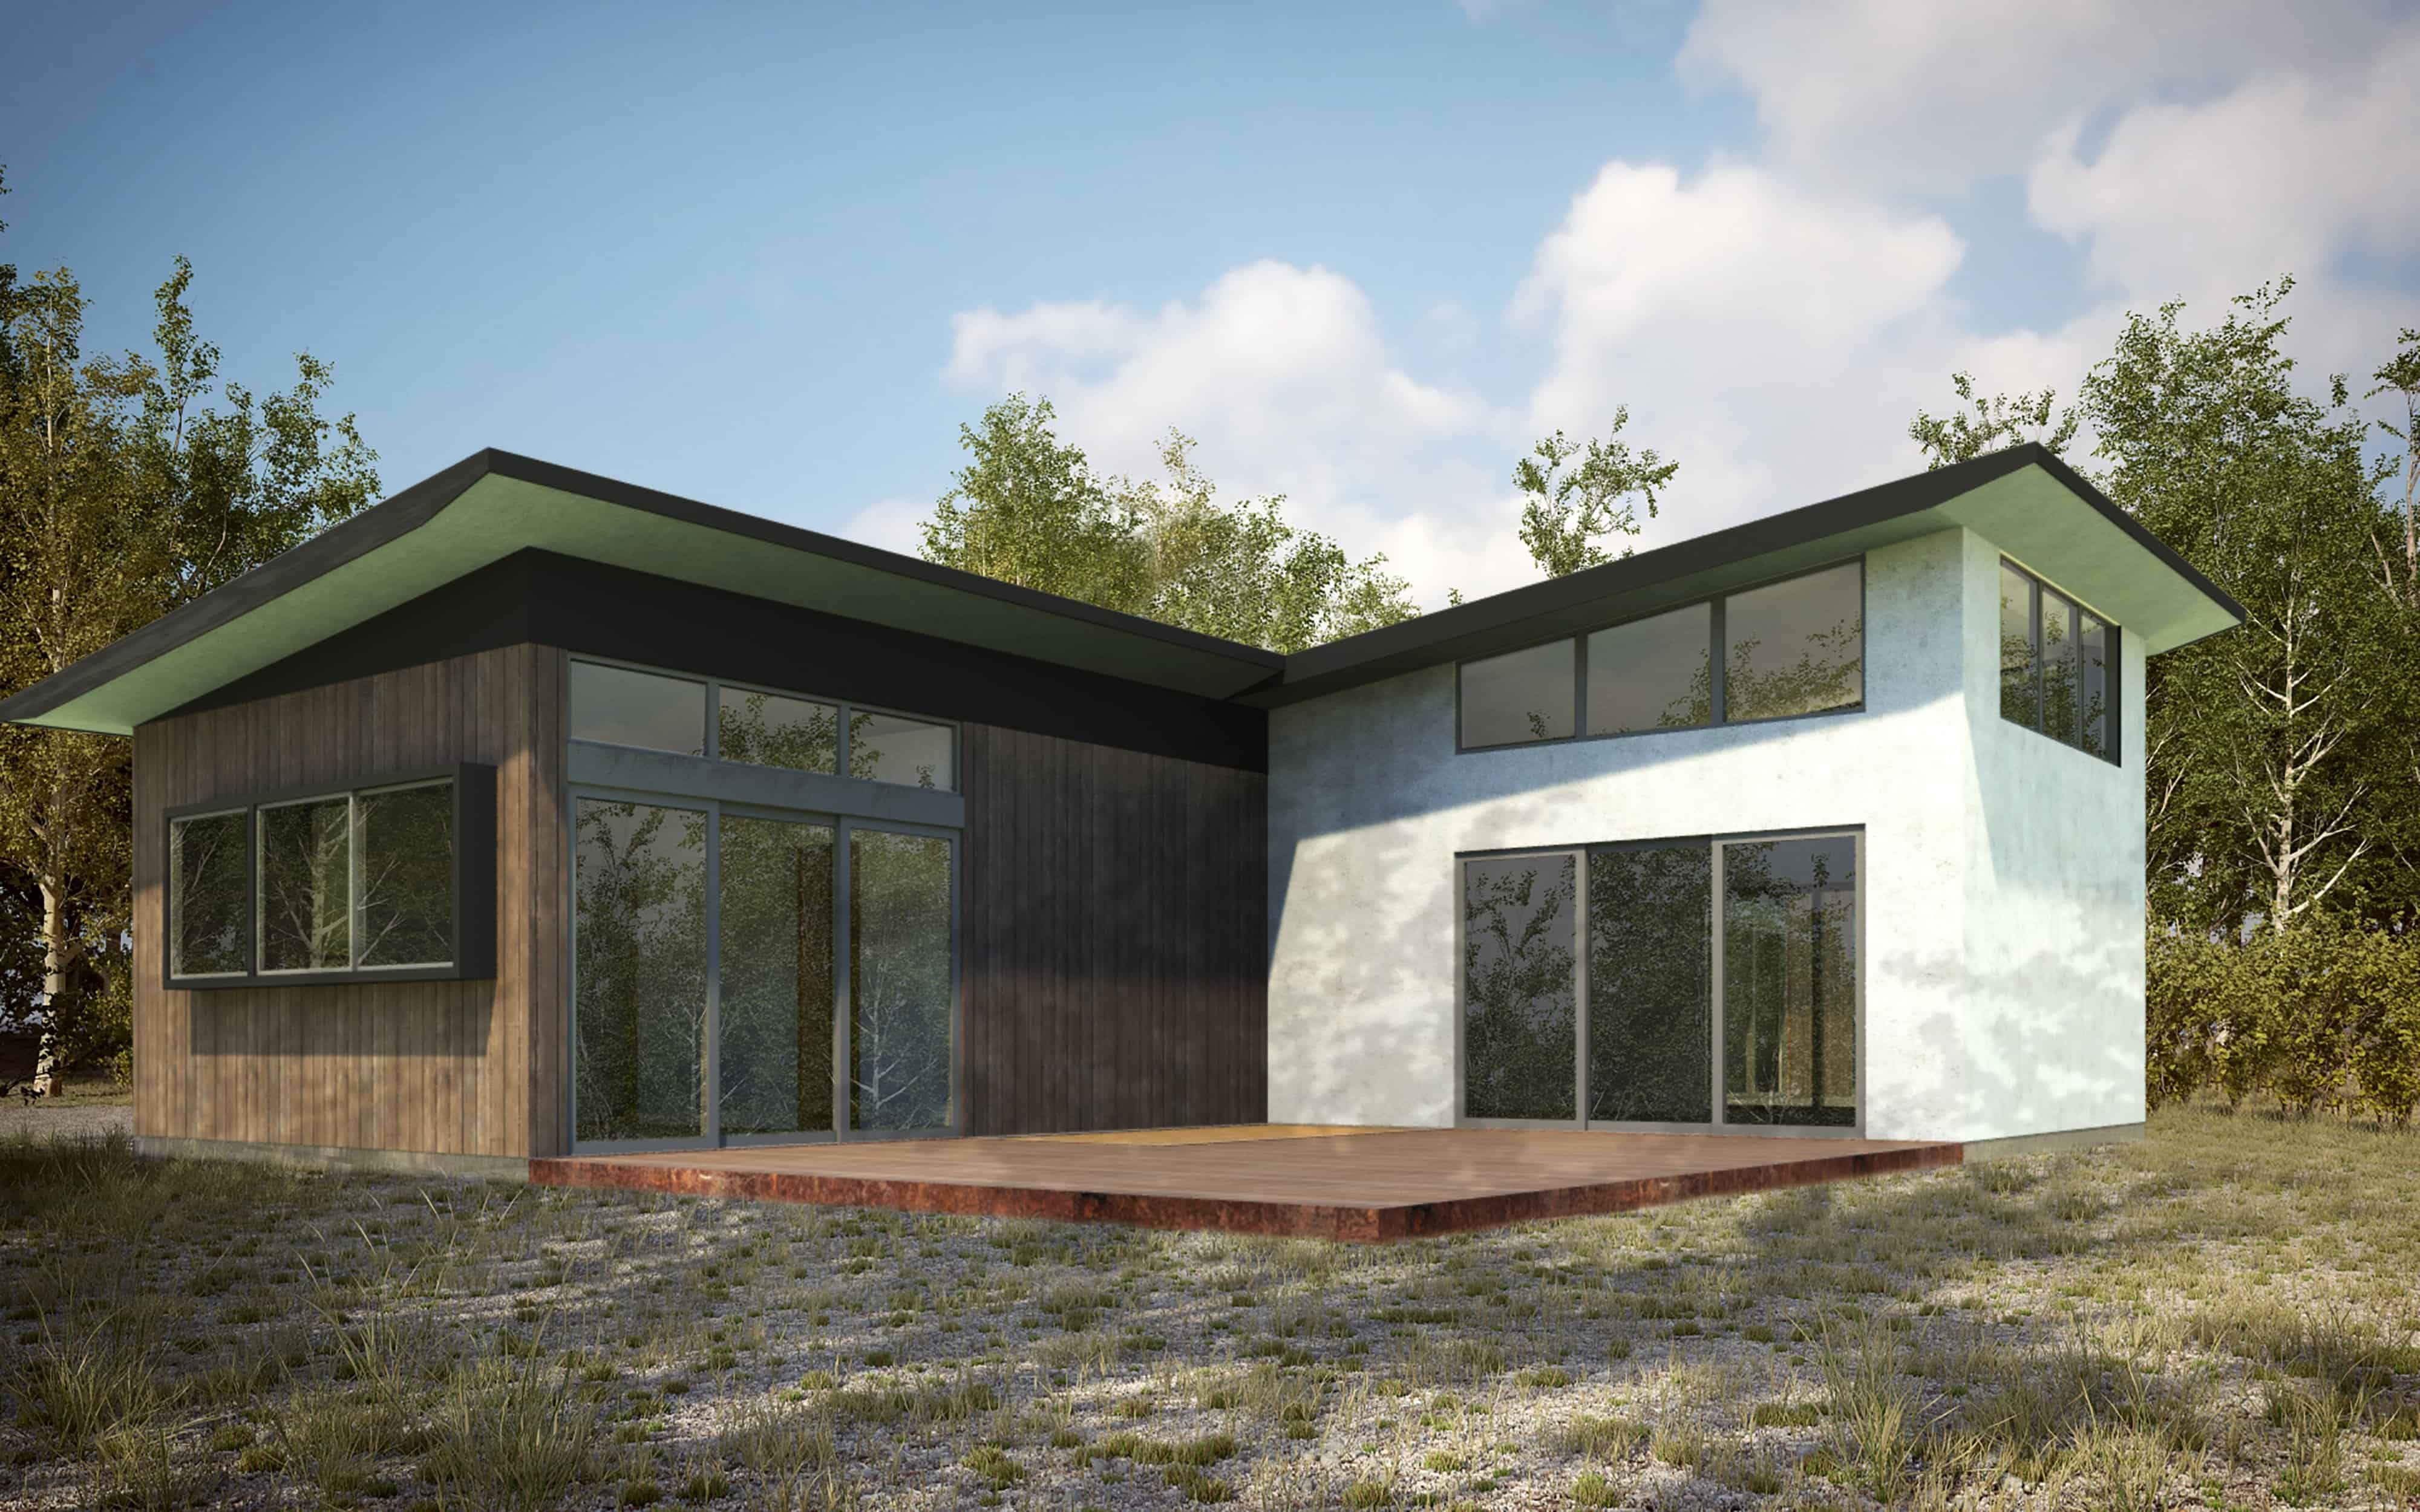 Ma Modular T Plan modern prefab home plan rendering with view of exterior front.